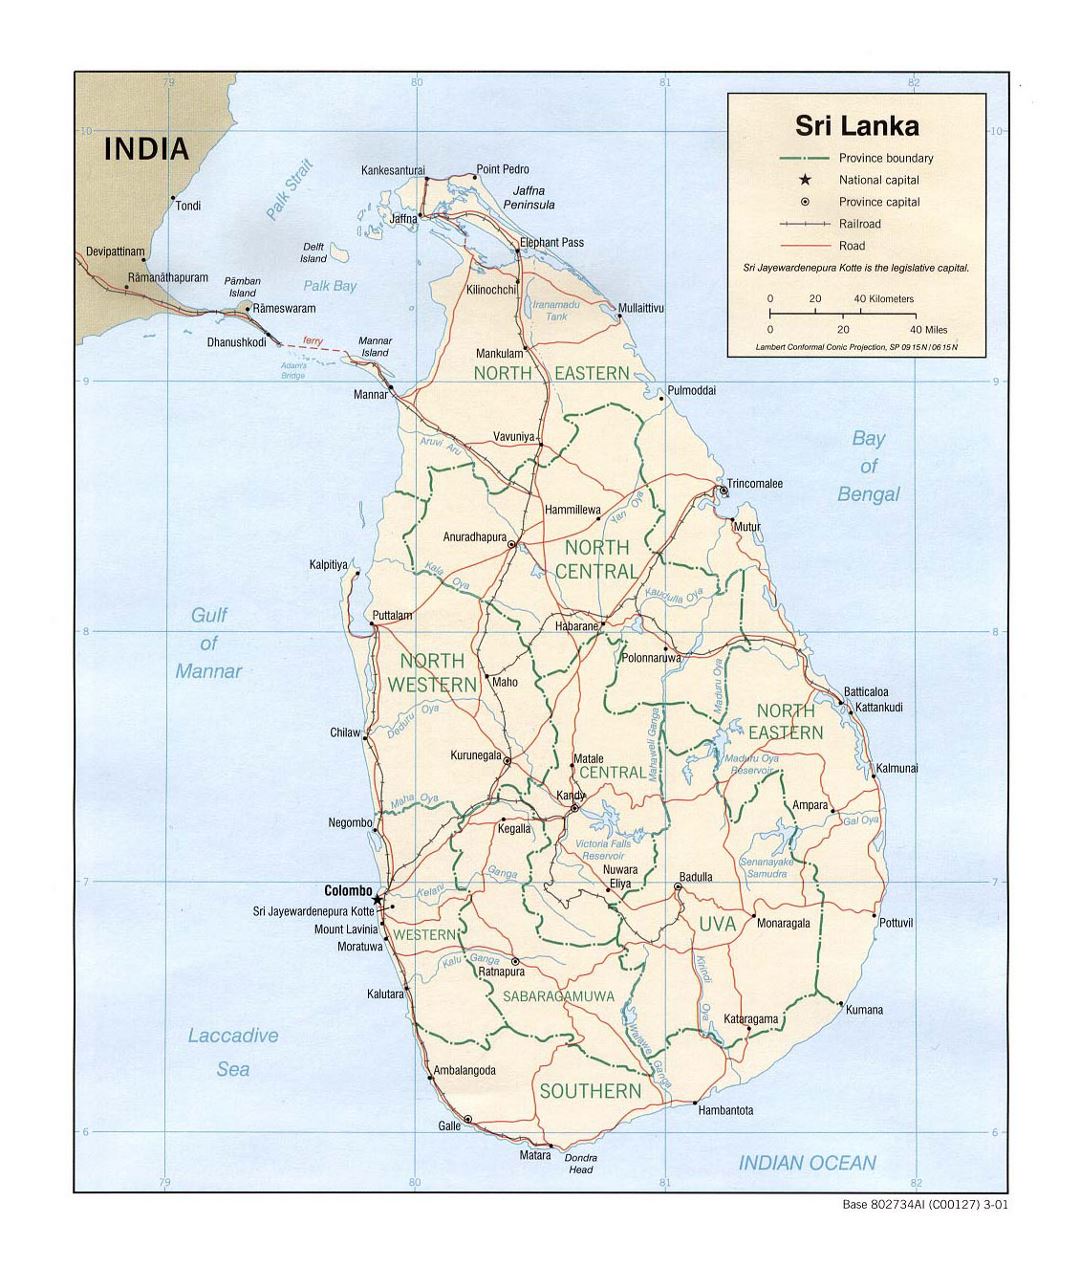 Detailed political and administrative map of Sri Lanka with roads, railroads and major cities - 2001